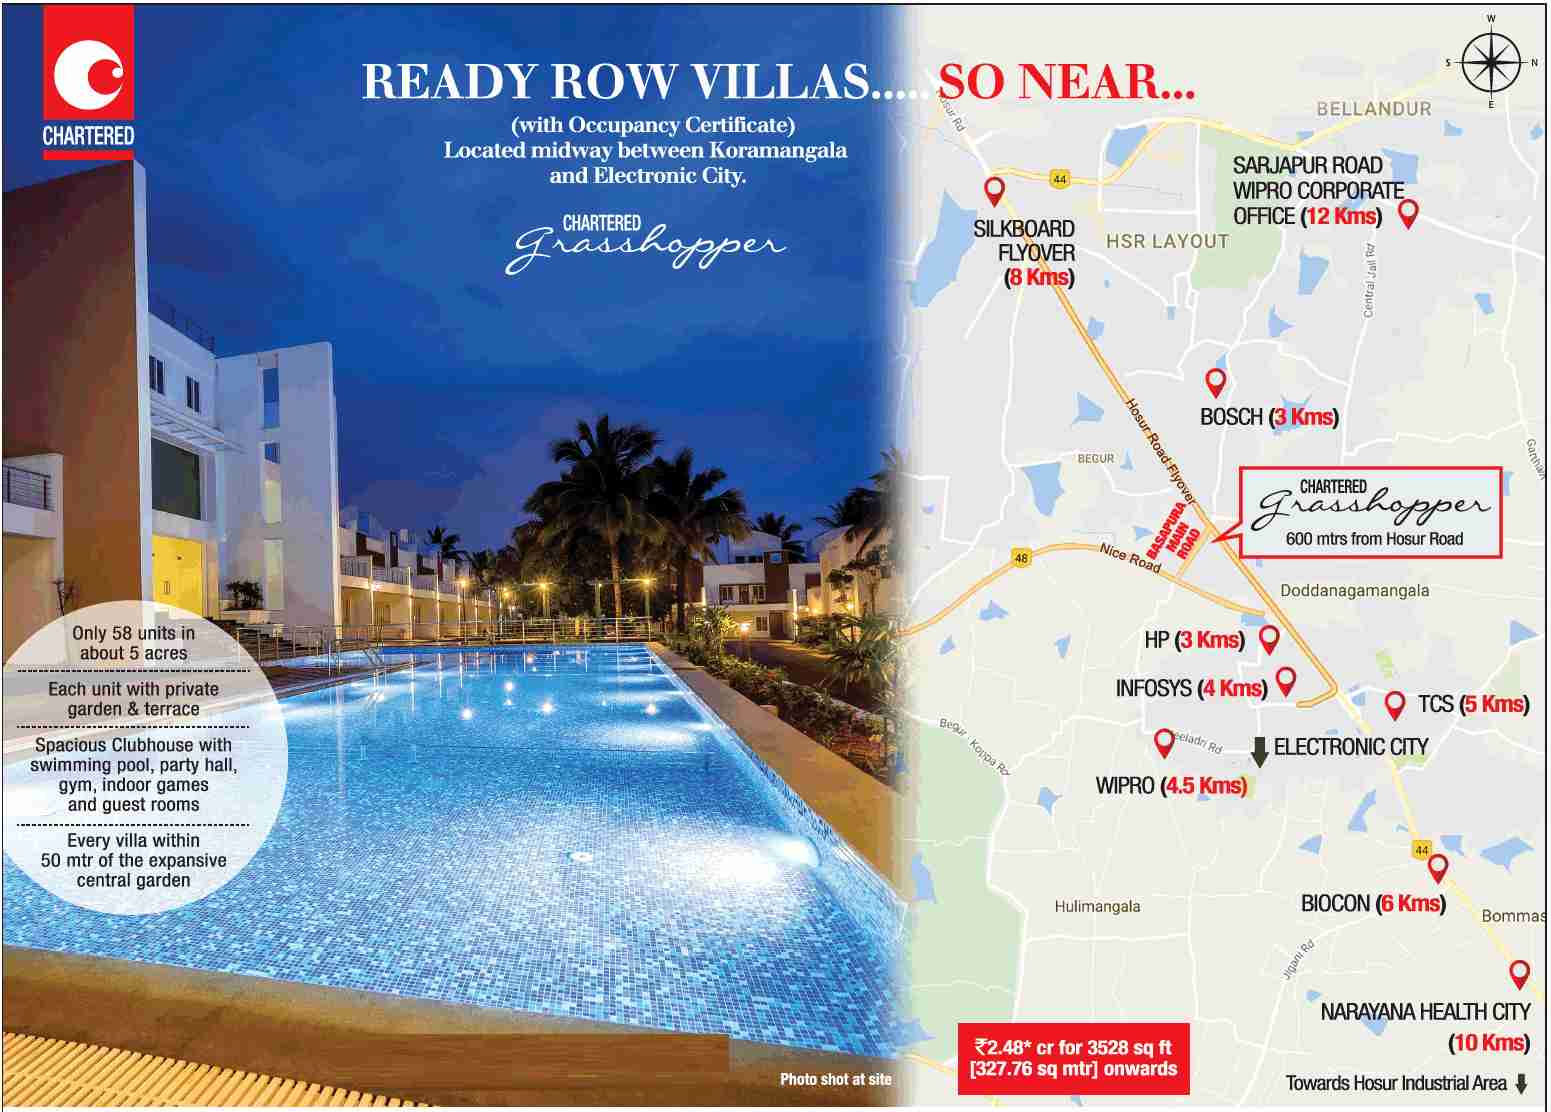 Reside at ready row villas at Chartered Grasshopper in Bangalore